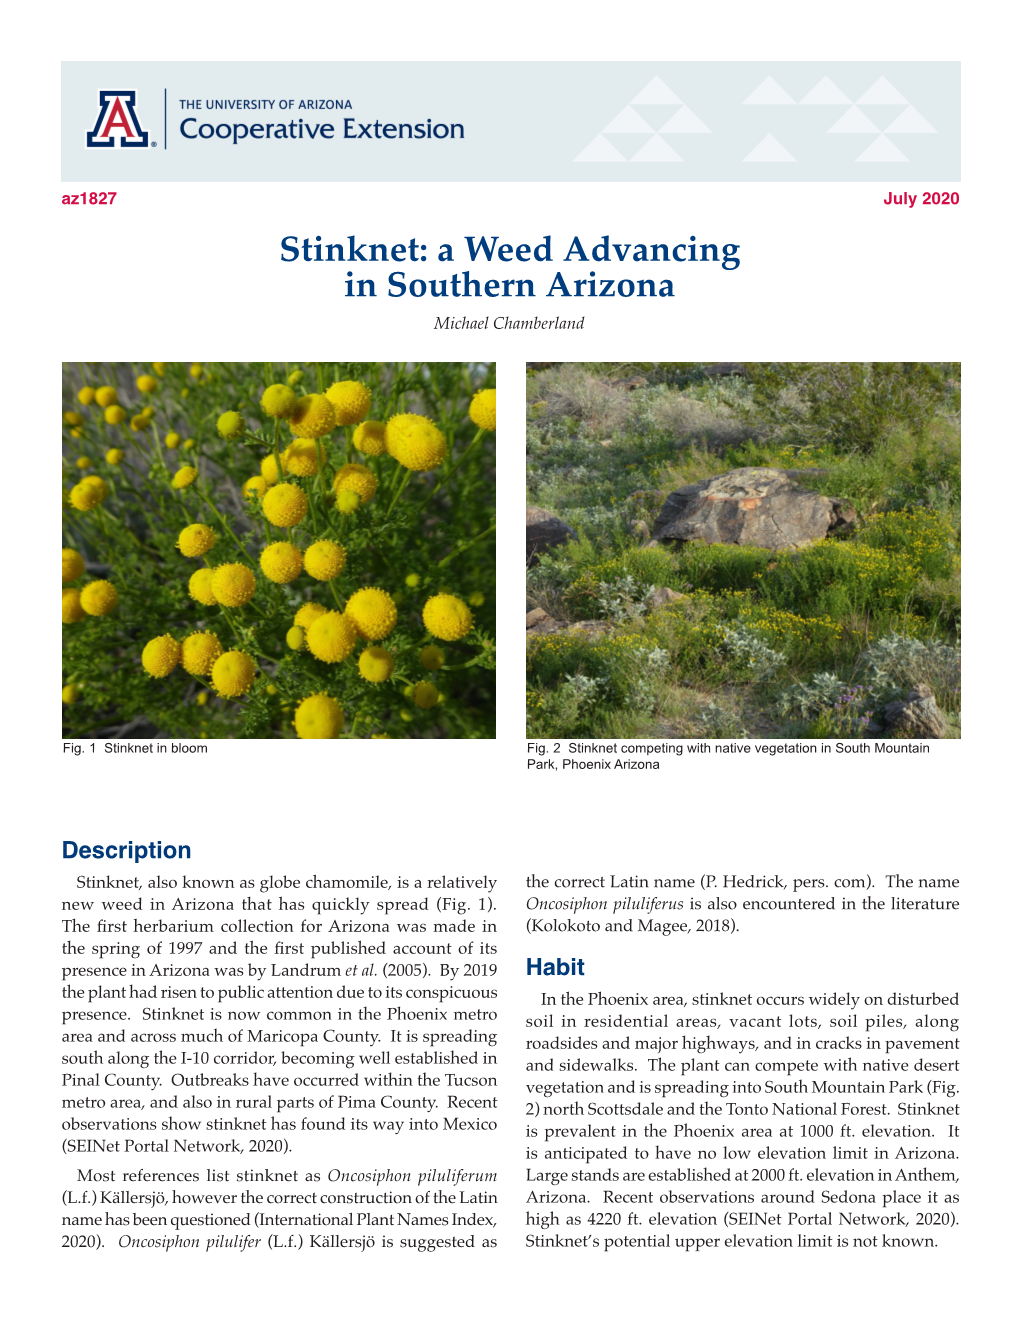 Stinknet: a Weed Advancing in Southern Arizona Michael Chamberland